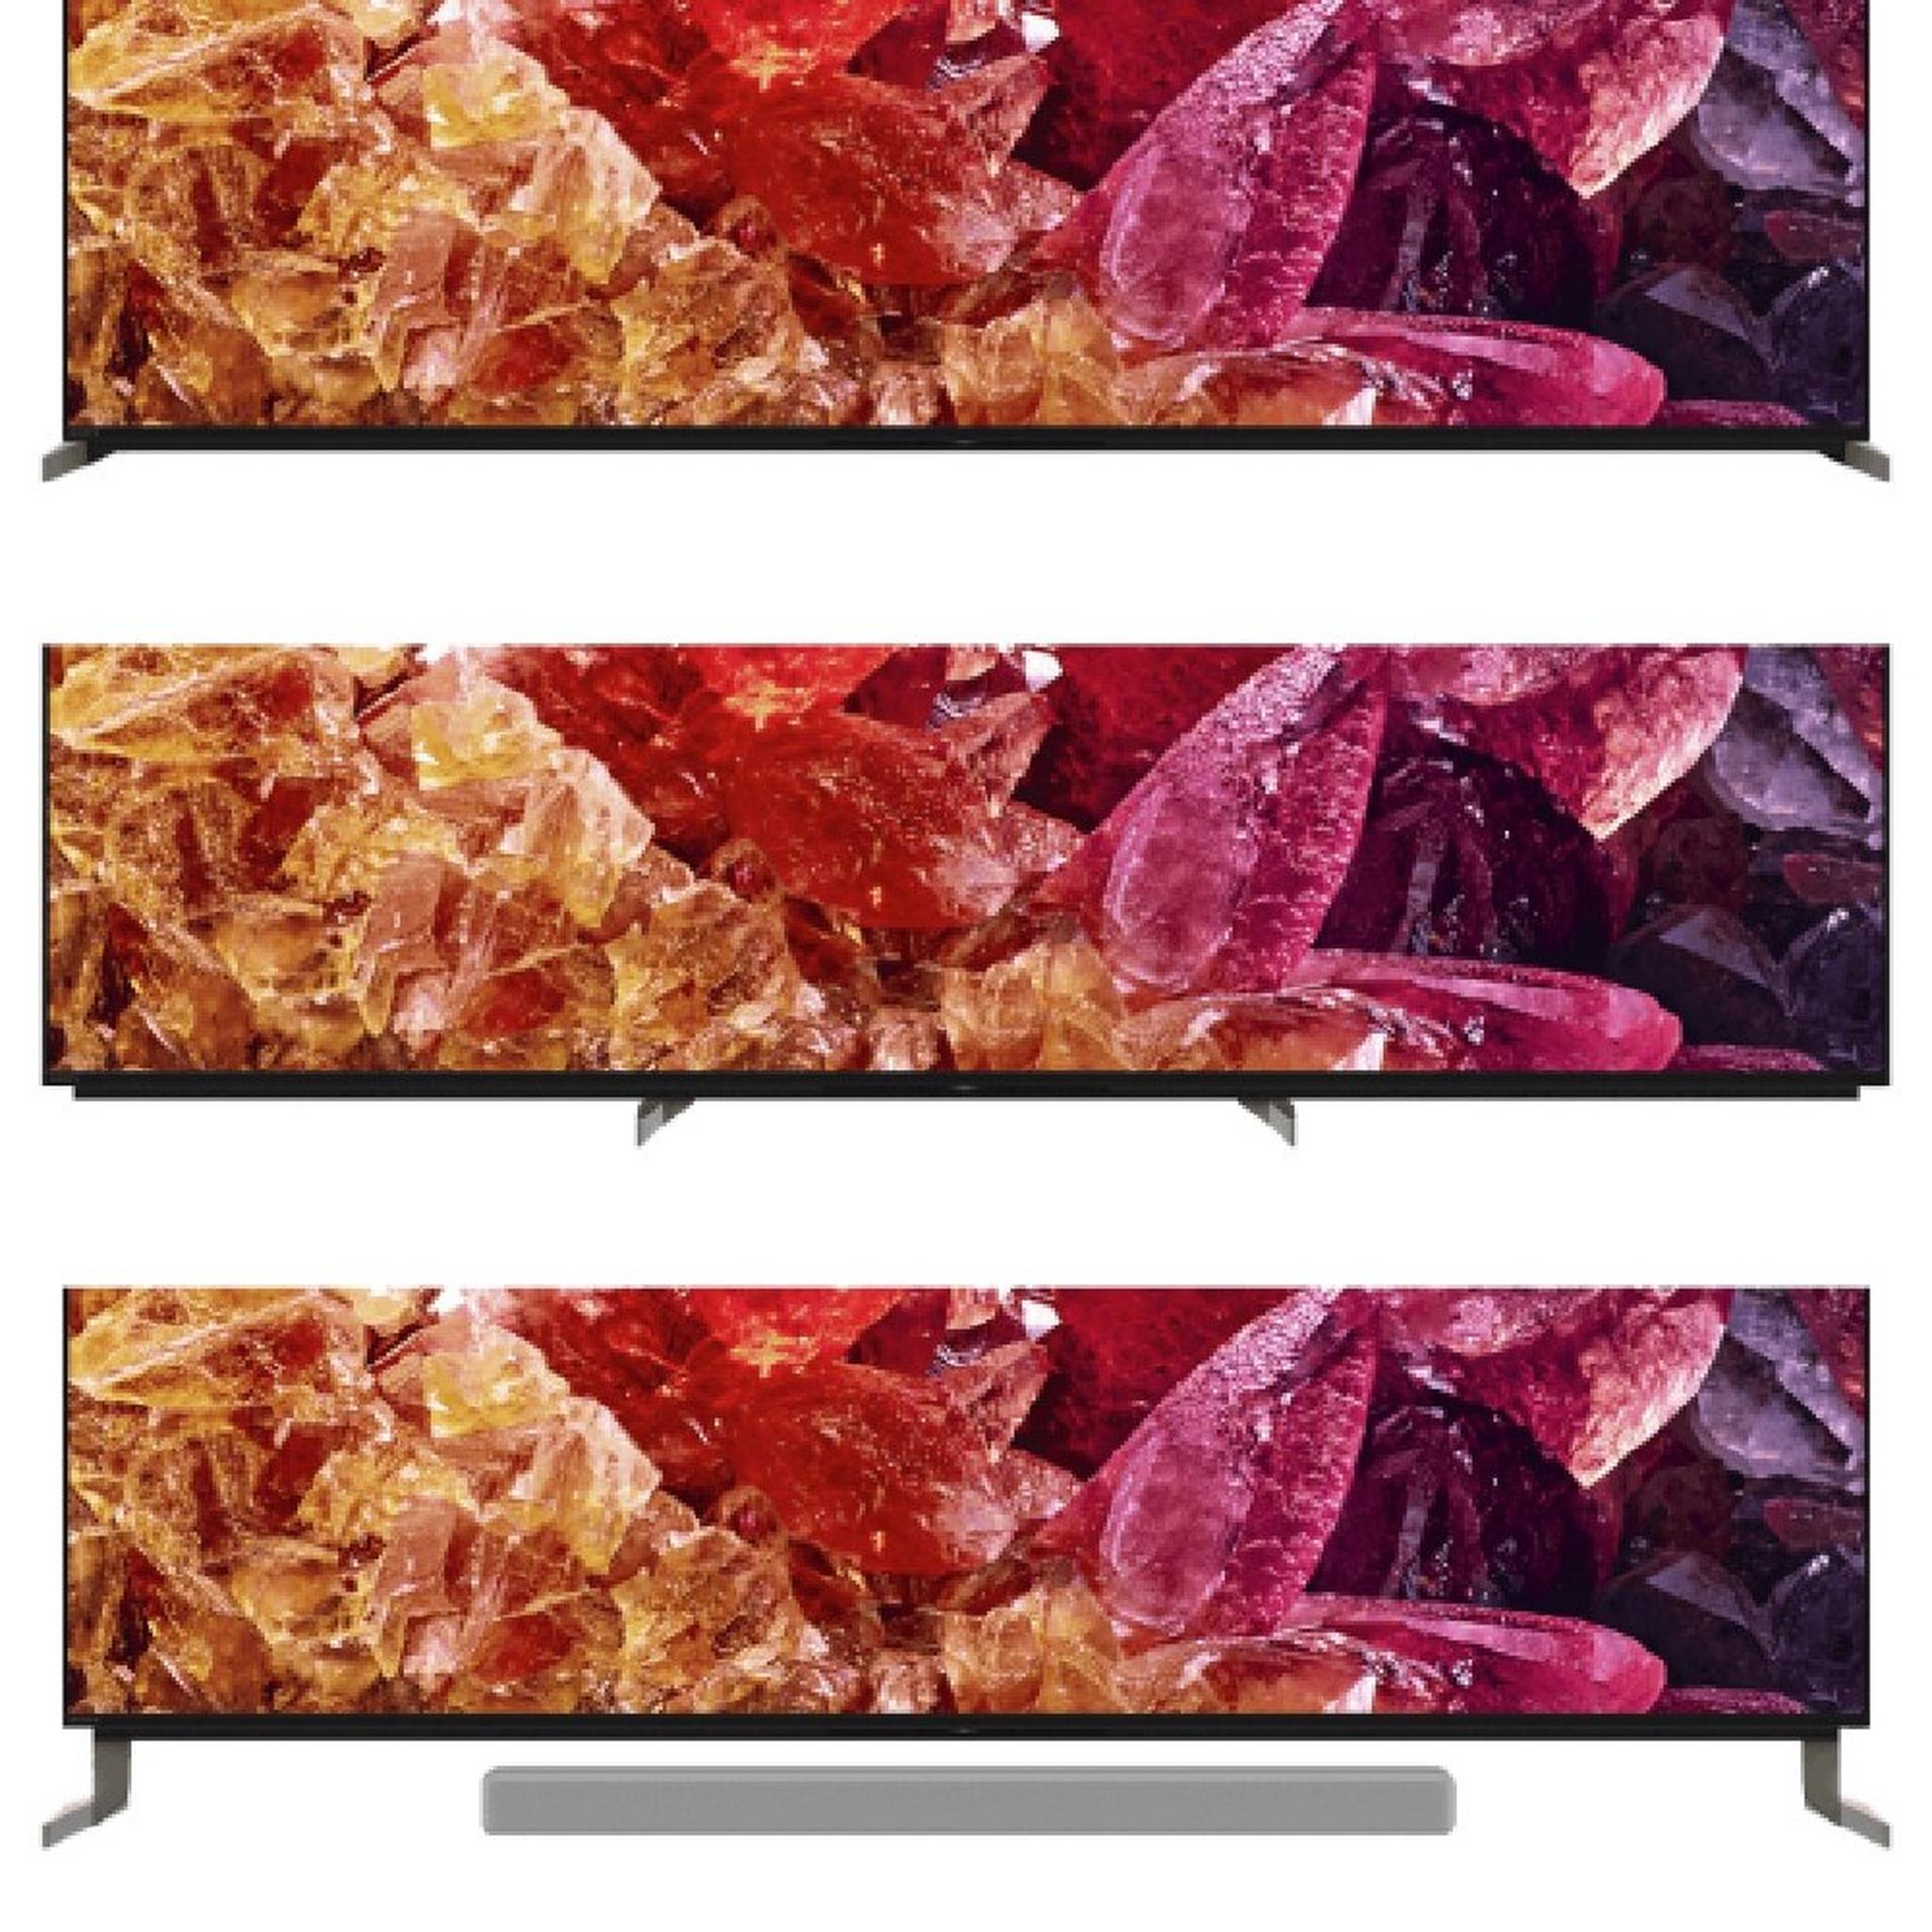 Sony Smart TV 65-inch Android UHD HDR (XR-65X95K)